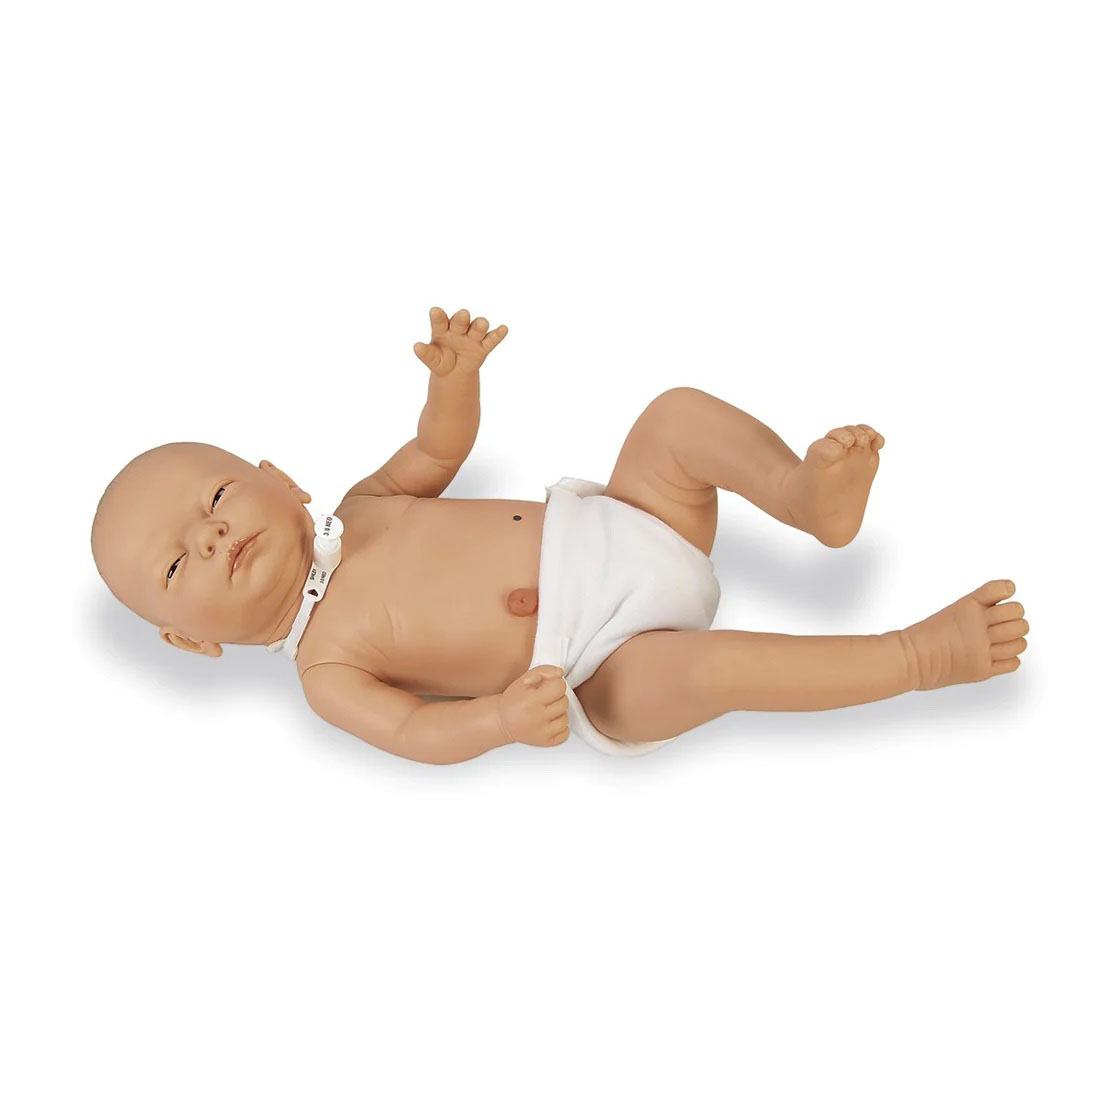 Special Needs Infant, Male – Light